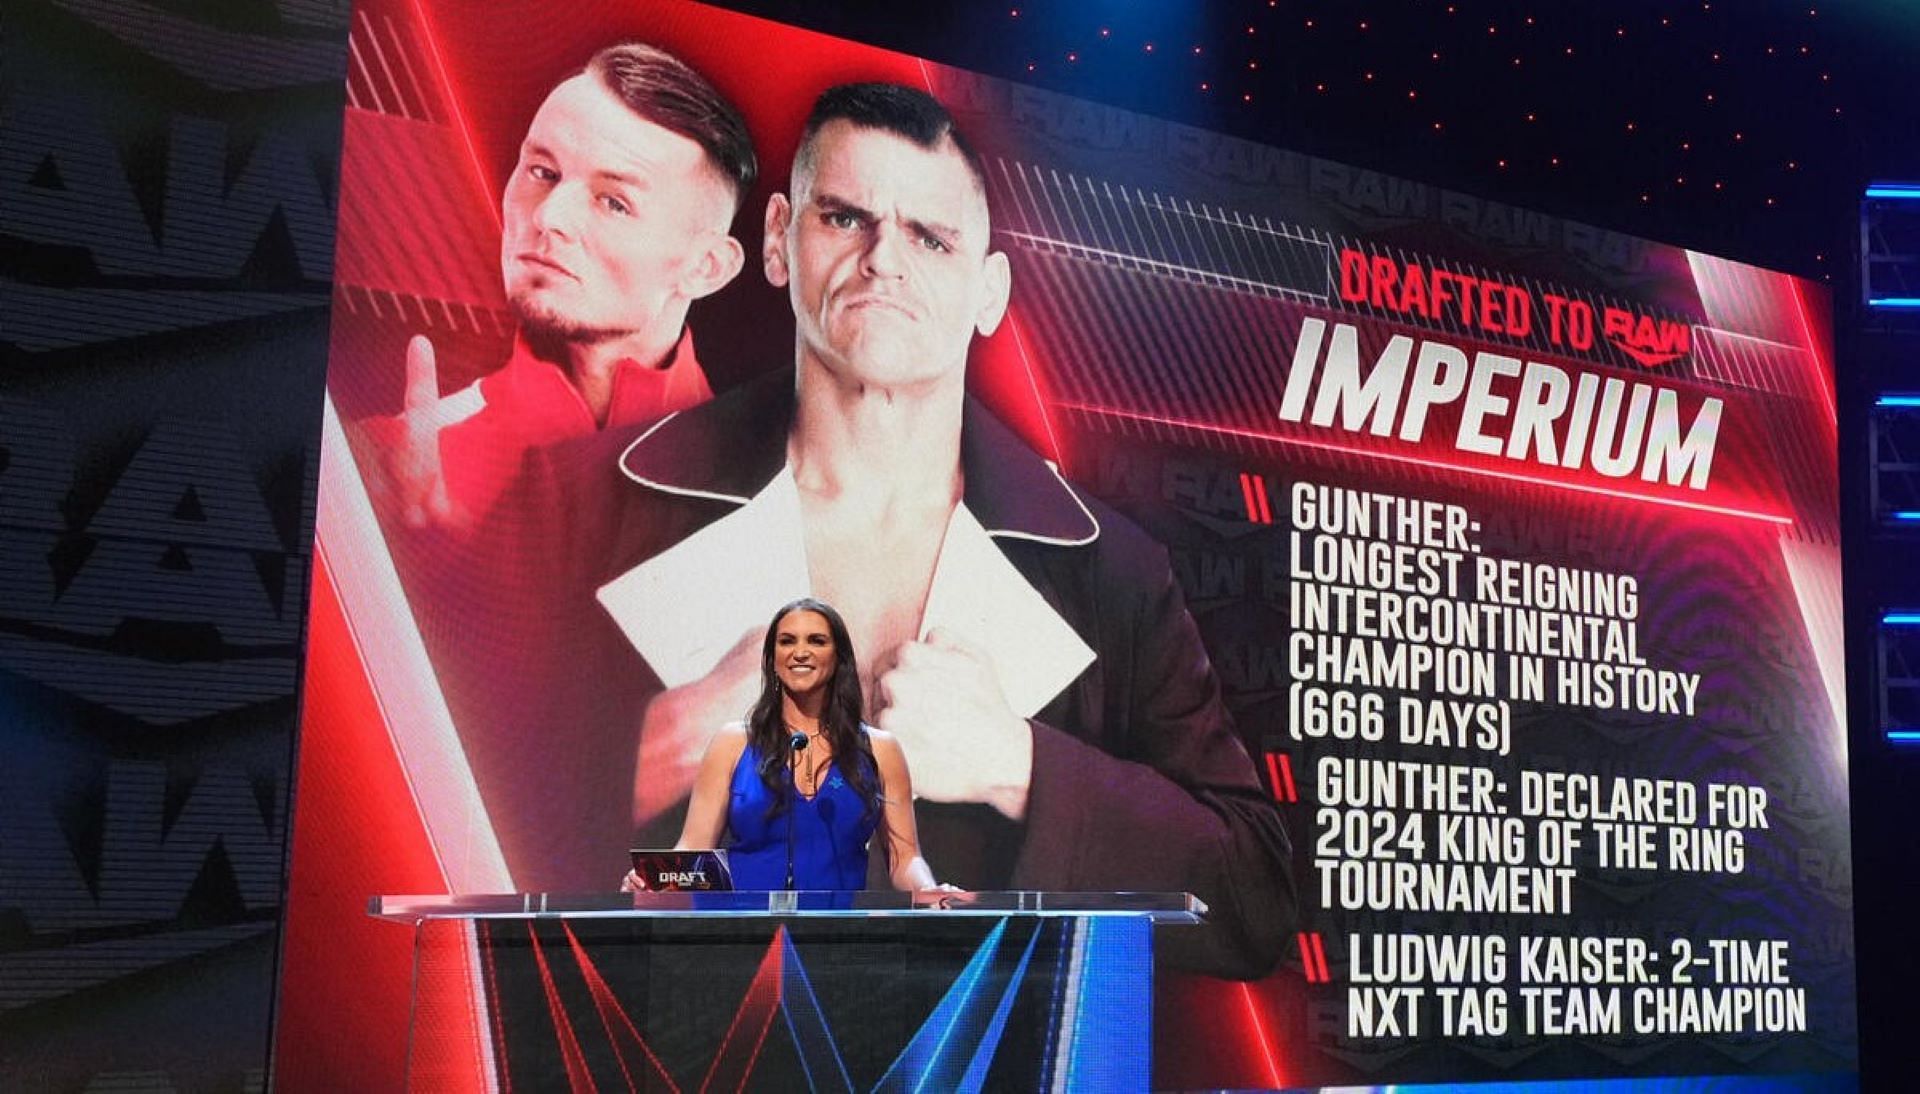 Imperium was the first pick on the second night of the WWE Draft.